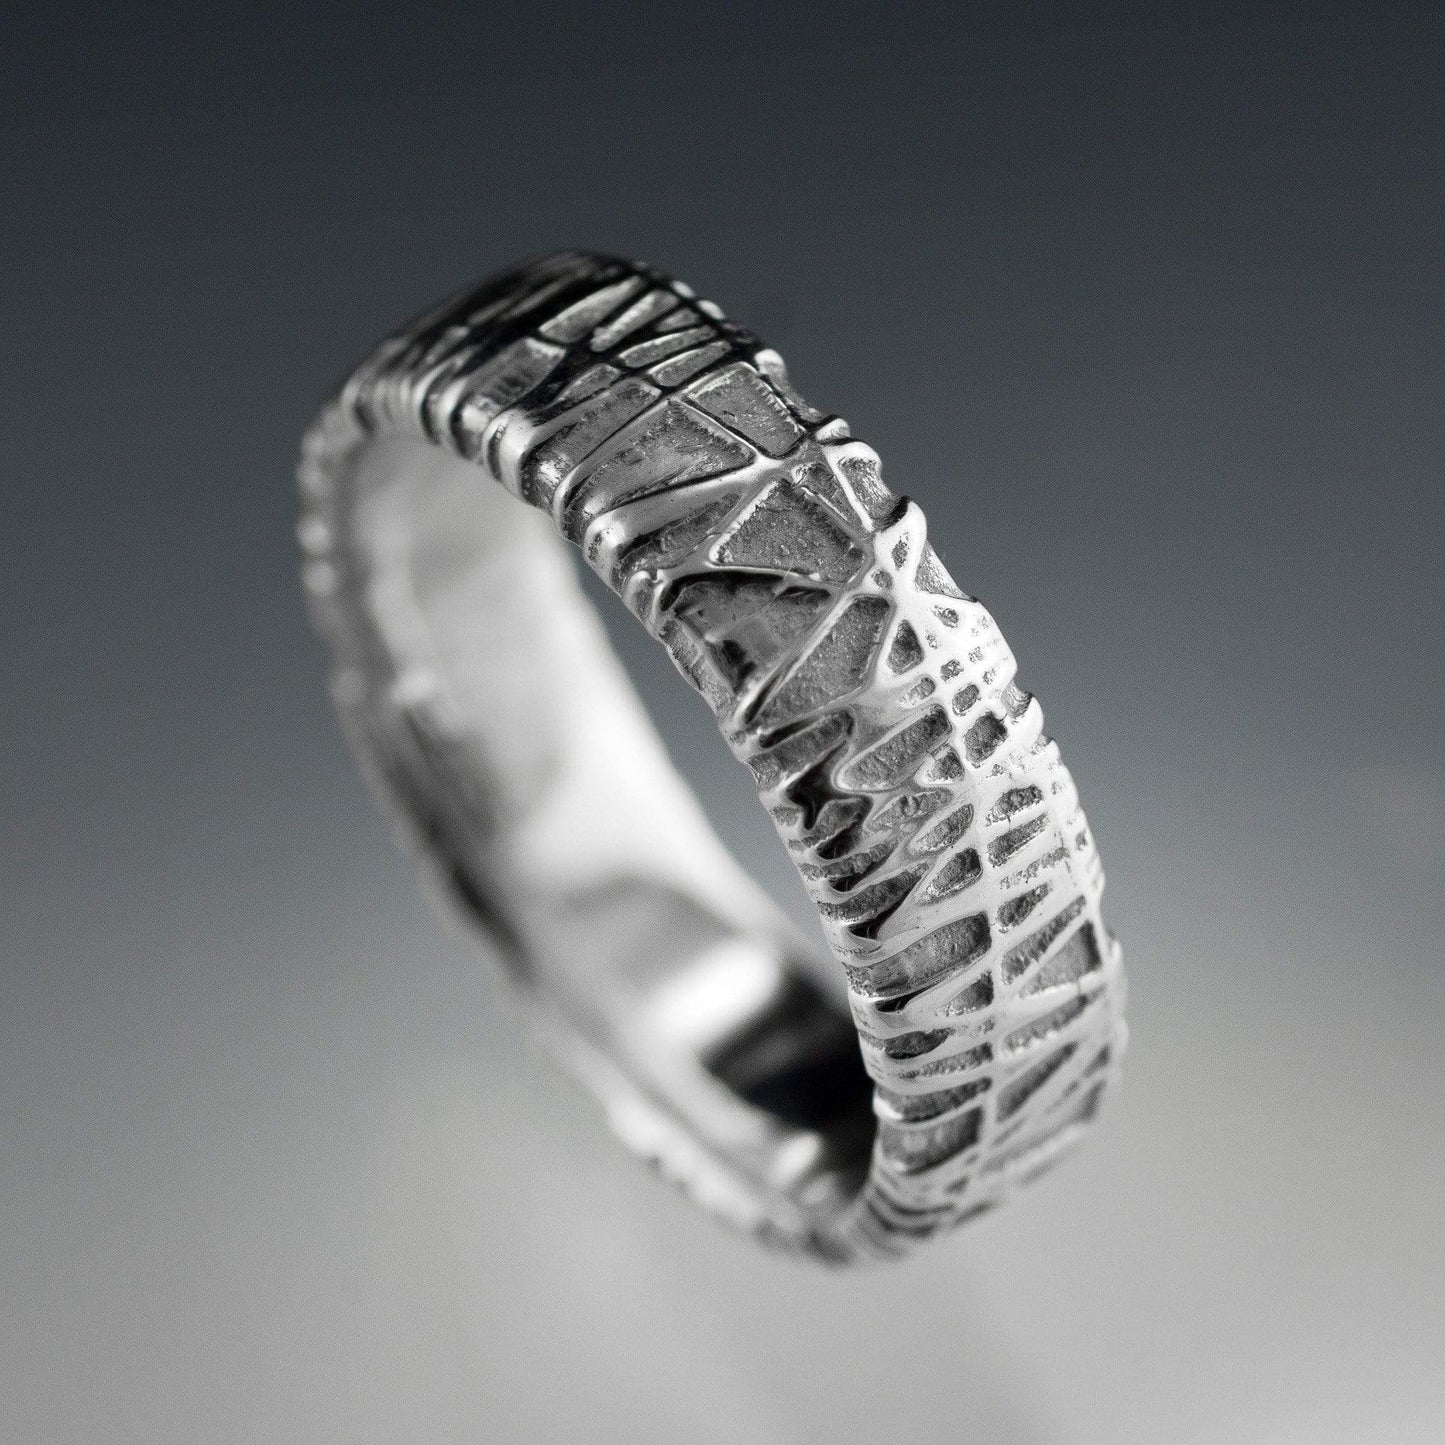 Wide Woven Texture Wedding Band, Bird Nest Ring Sterling Silver / 7mm Ring by Nodeform